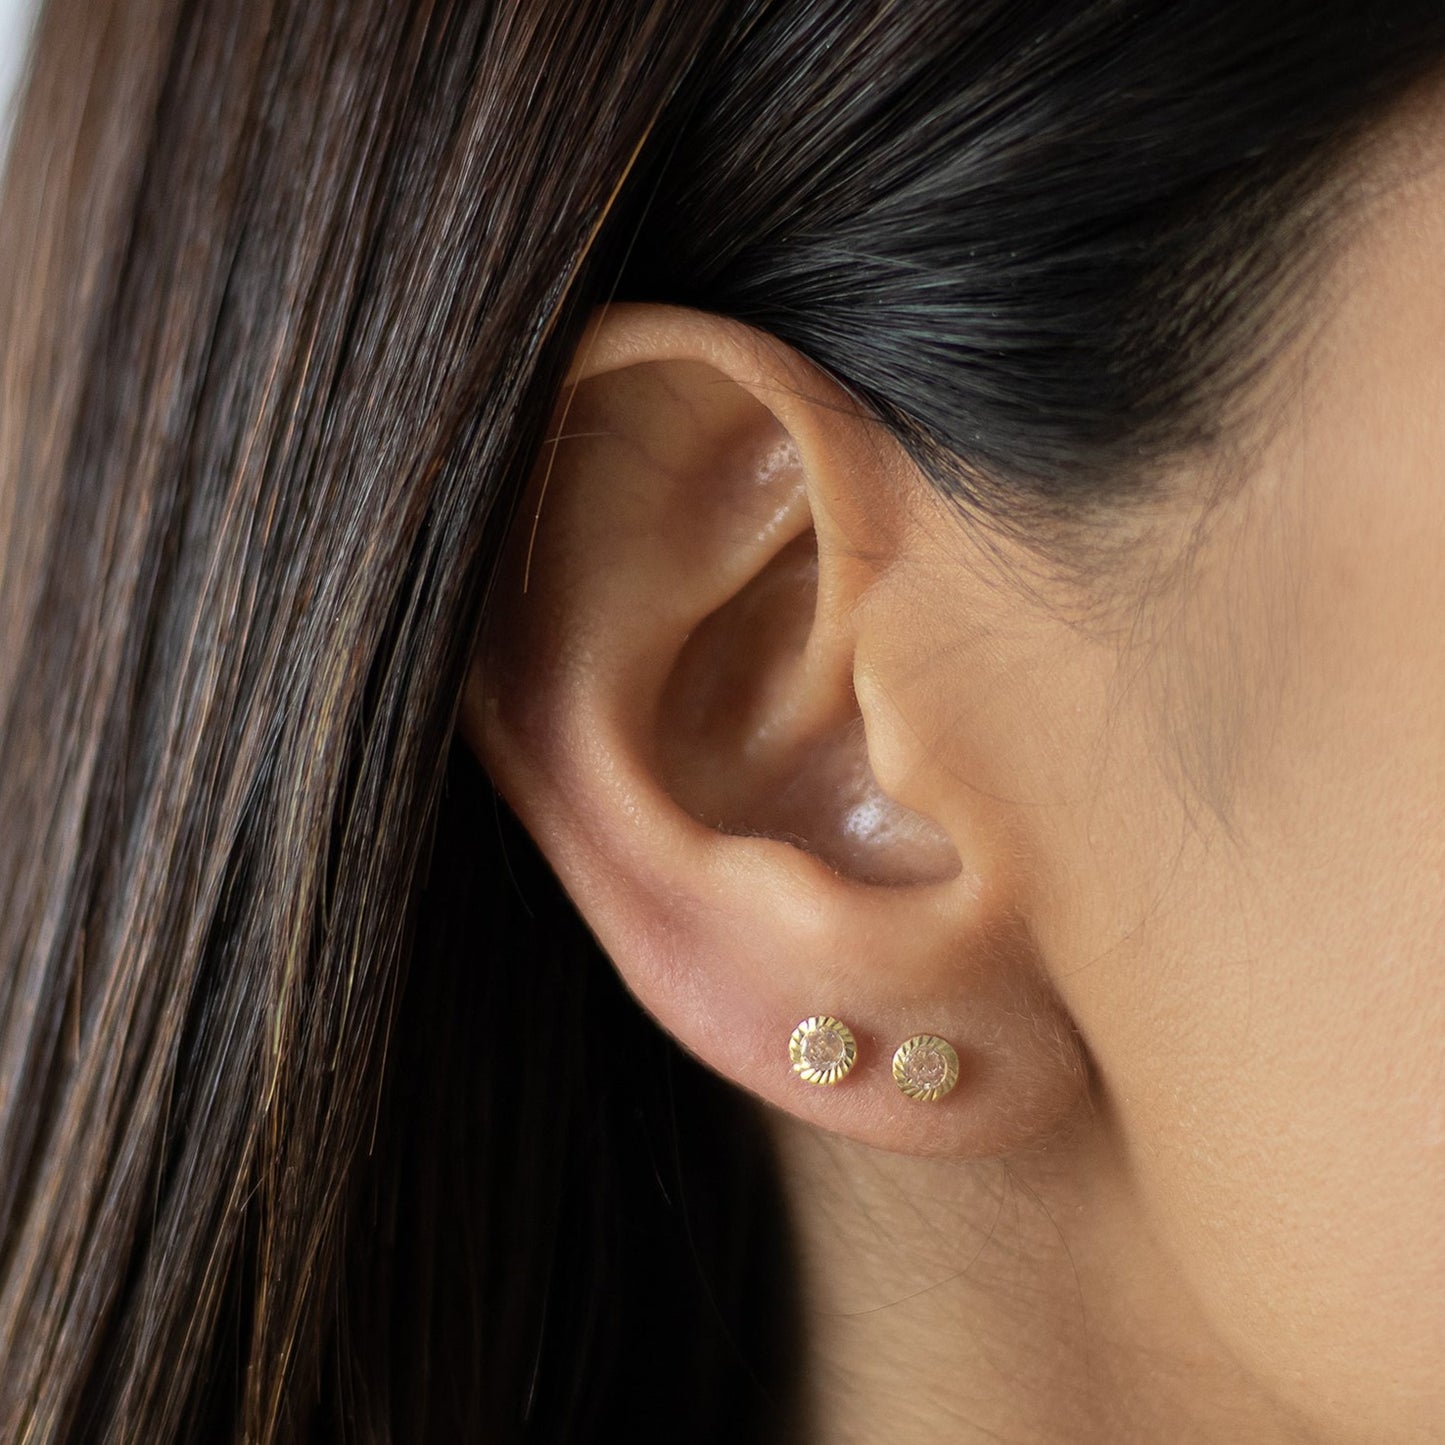 These perfect minimalist studs are a fabulous gift for your best friend or even yourself. These screw-back earrings look great in second hole piercings, but don't be afraid to try them in first holes too!